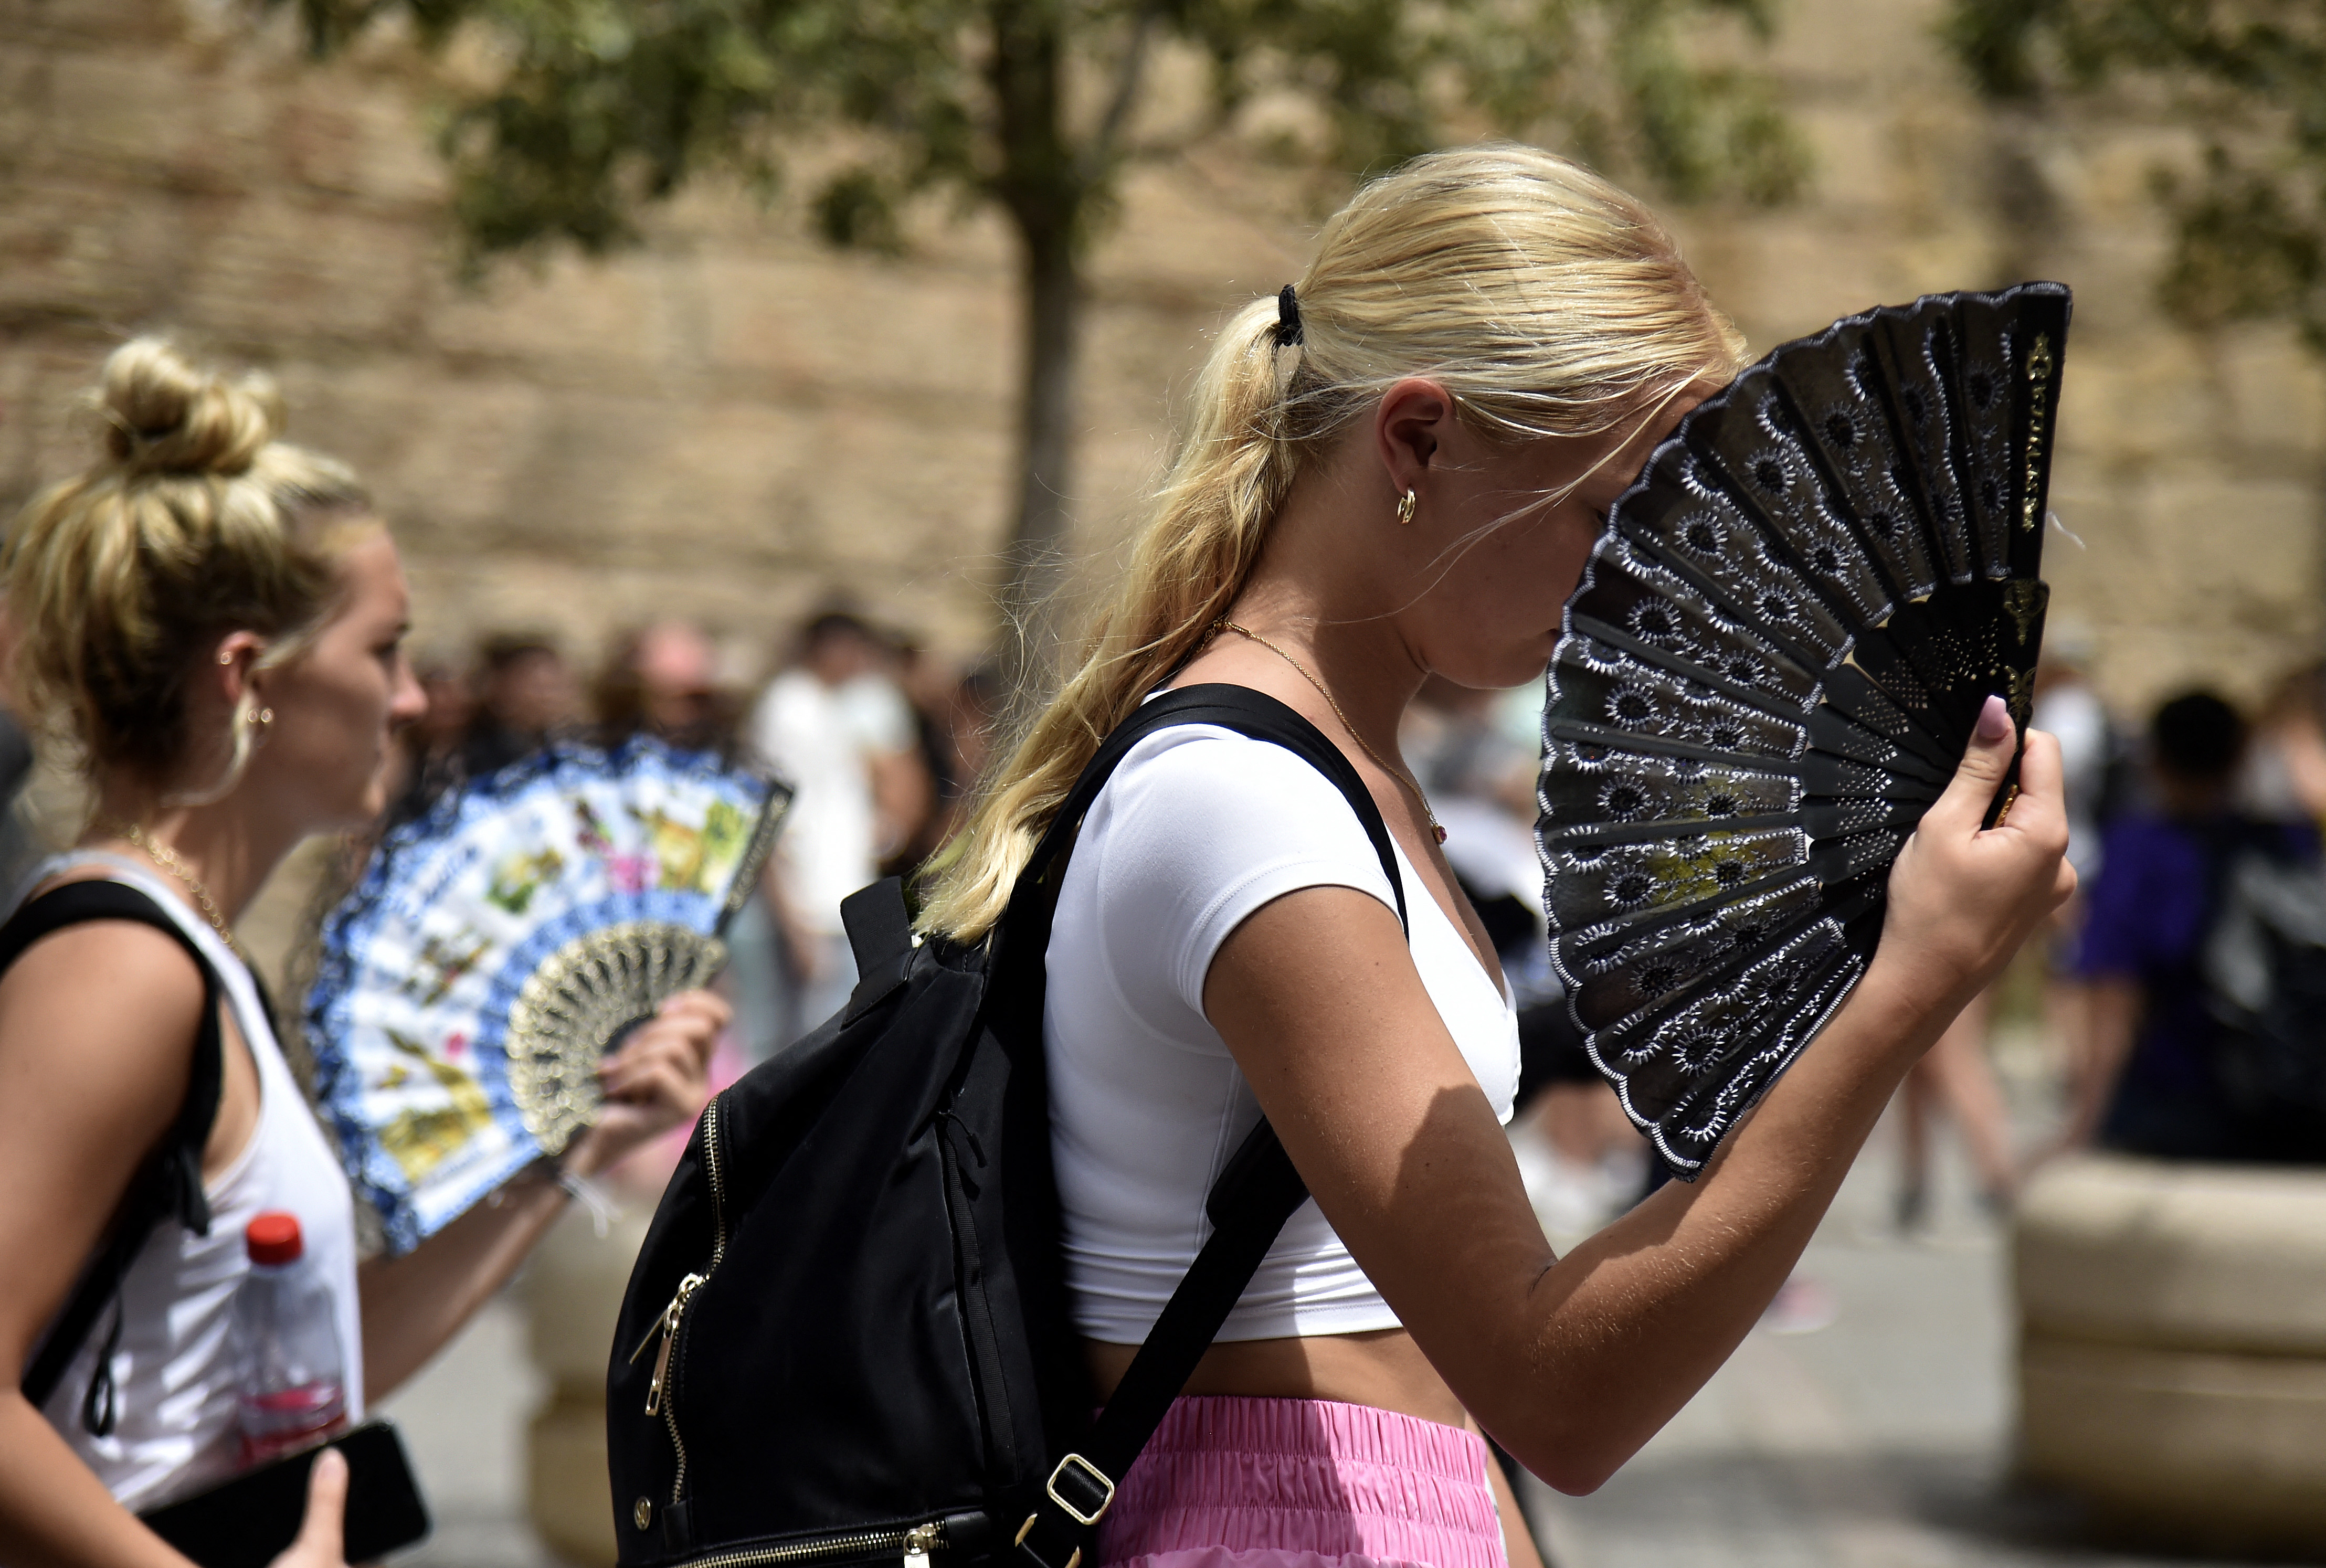 A girl uses a fan to cool herself off in Spain